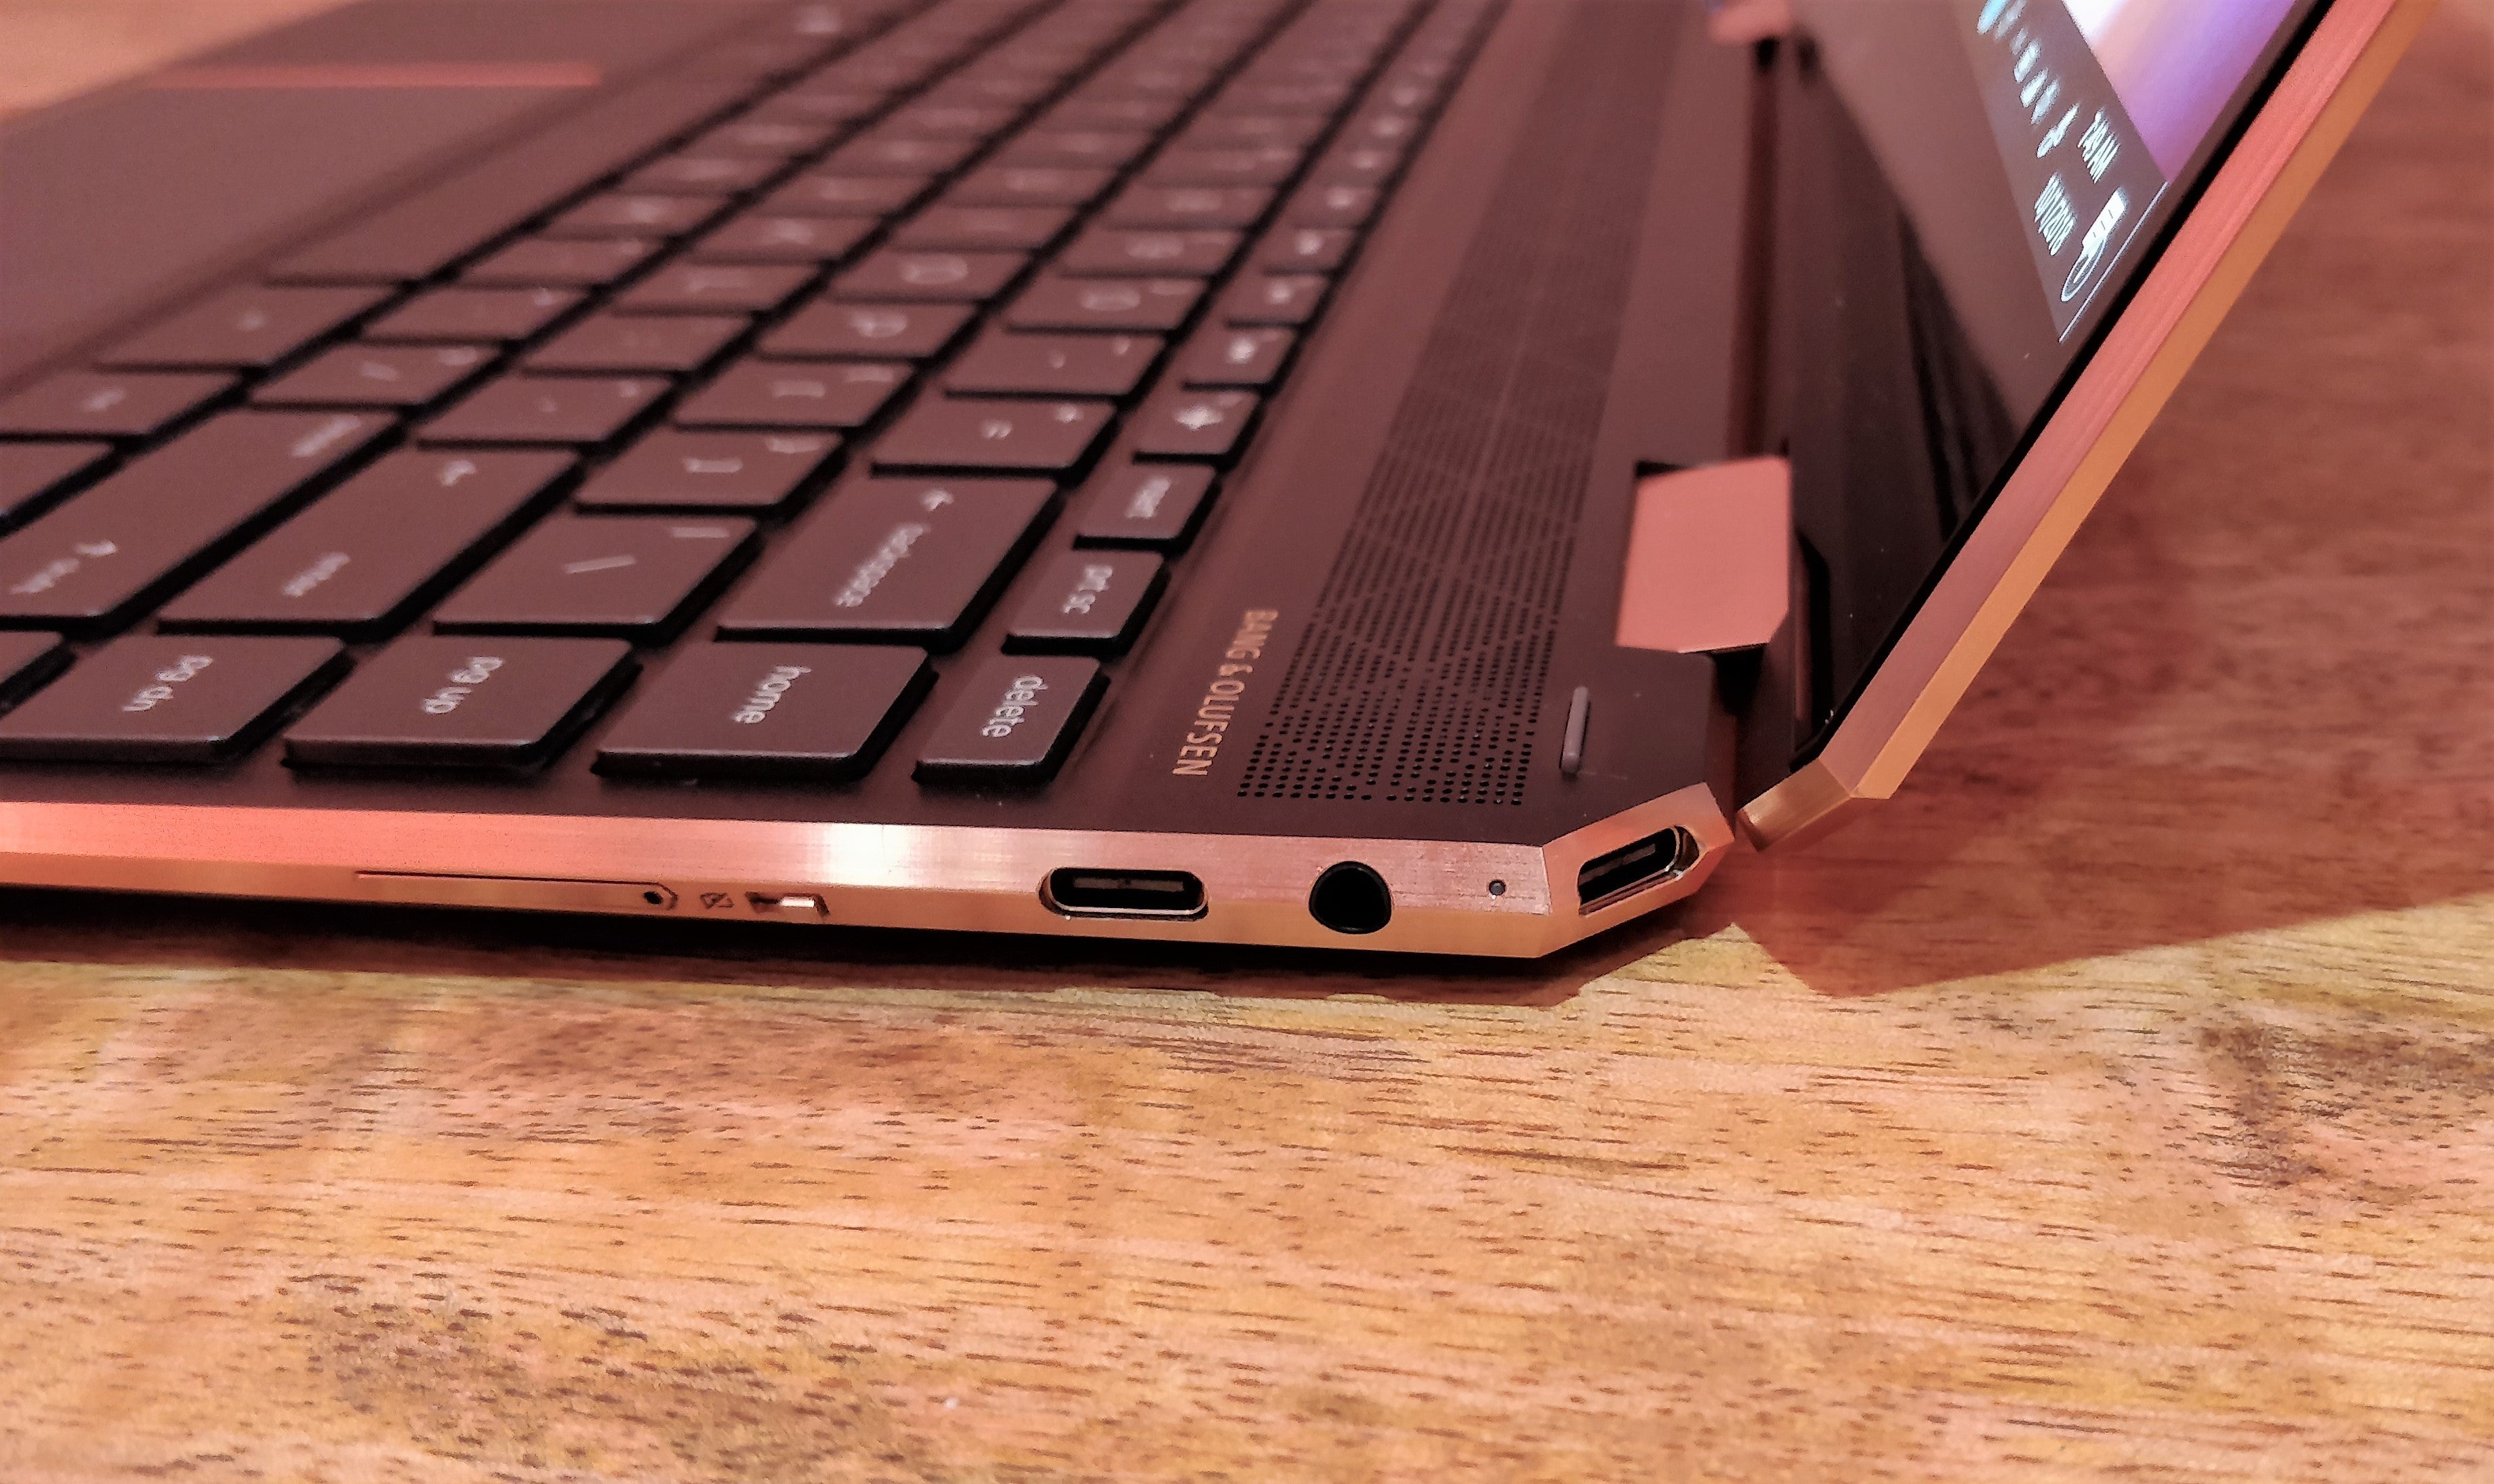 HP Spectre x360 15 (2018) hands on: HP's convertible notebook leaps to